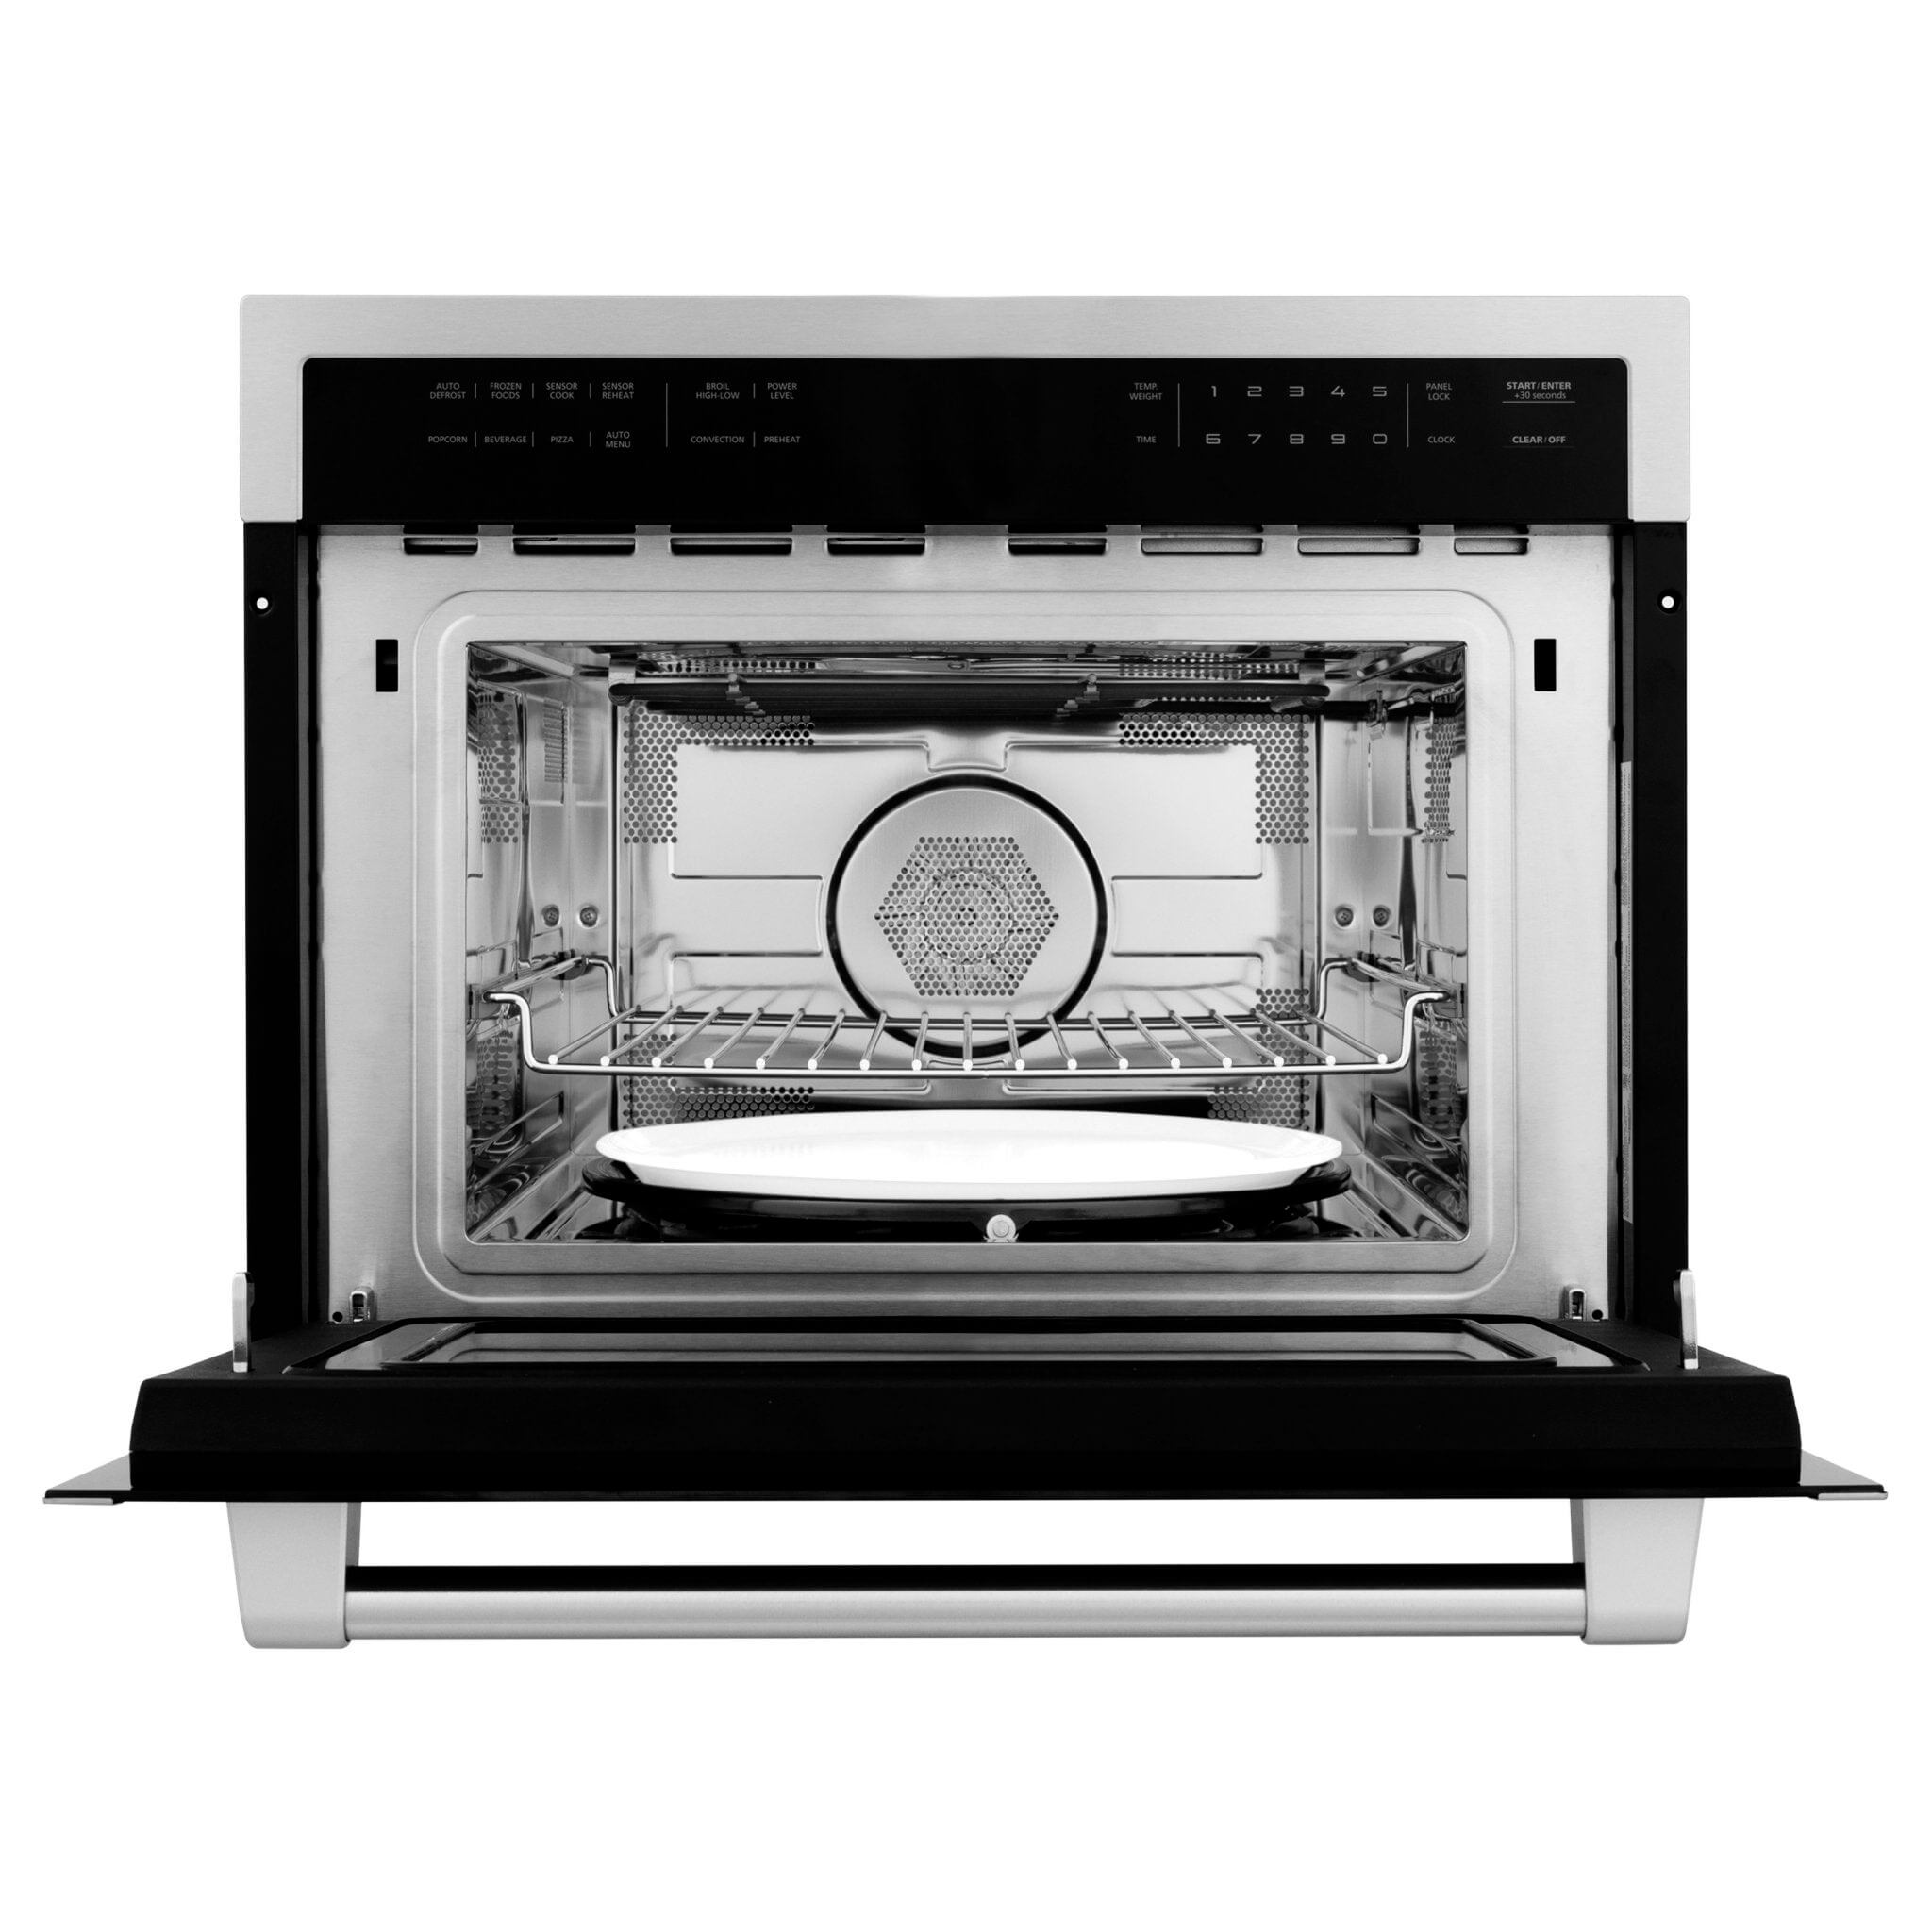 ZLINE 24 in. Stainless Steel Built-in Convection Microwave Oven with Speed and Sensor Cooking (MWO-24) Front View Door Open